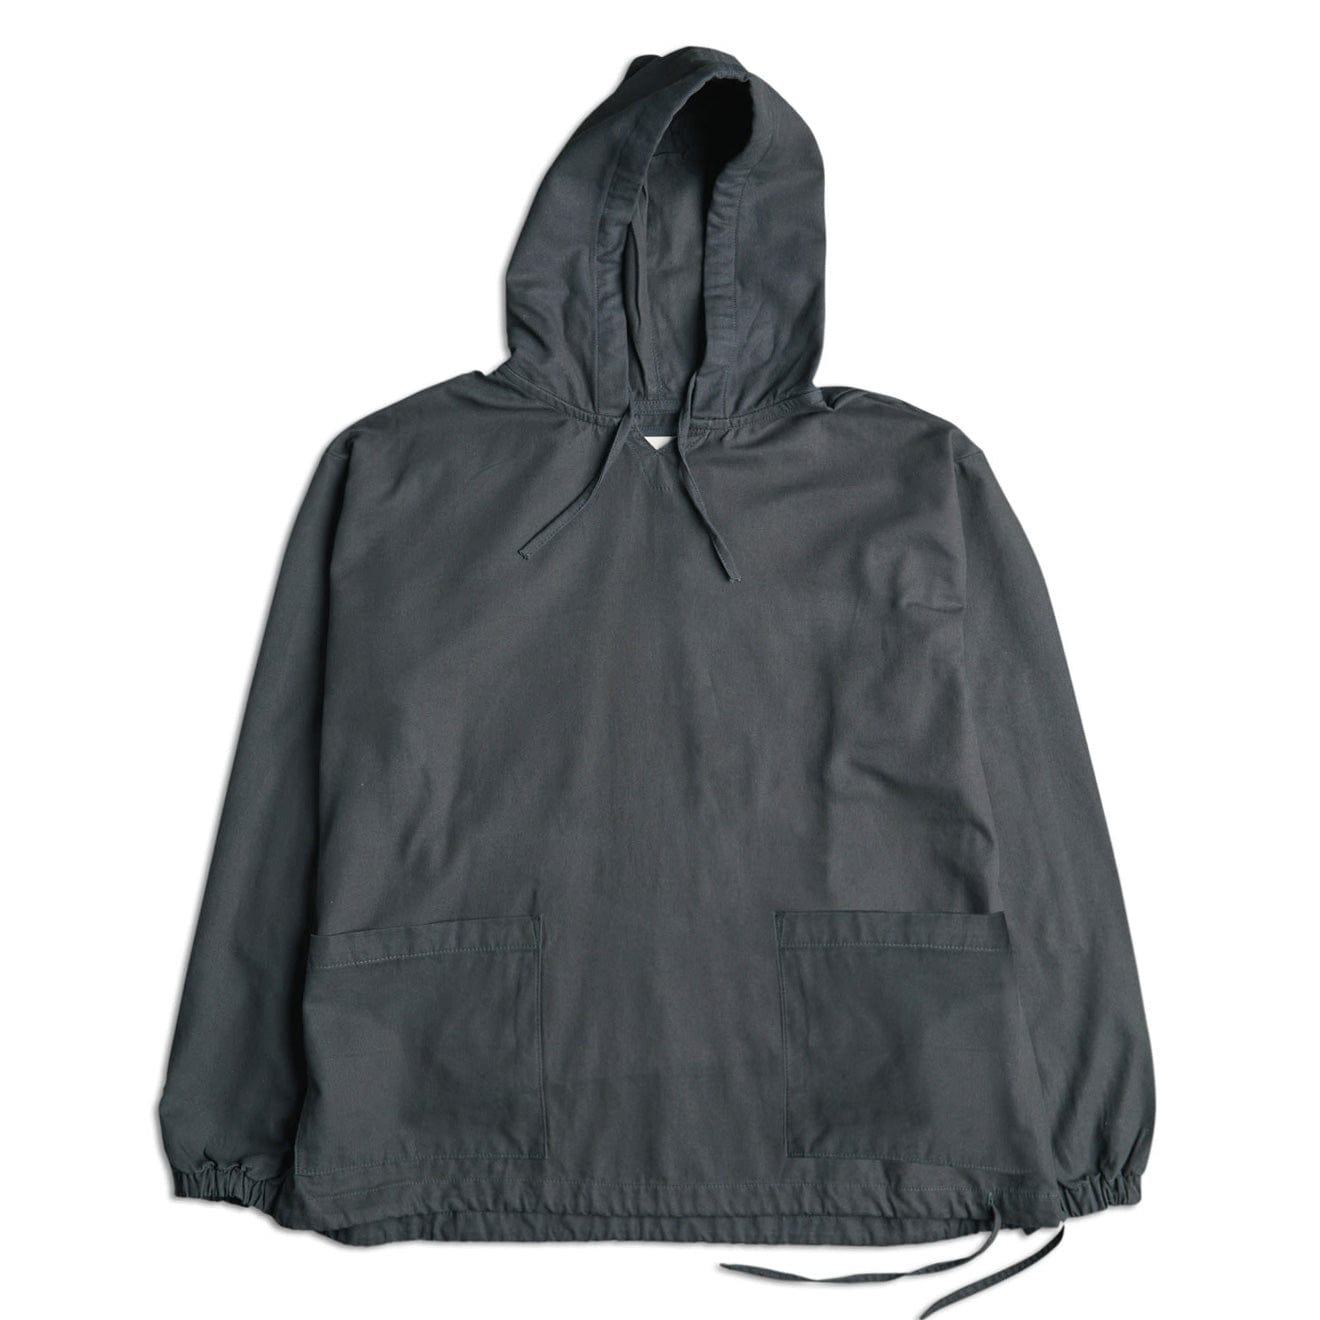 Uskees 3008 Organic Smock Faded Black | The Sporting Lodge